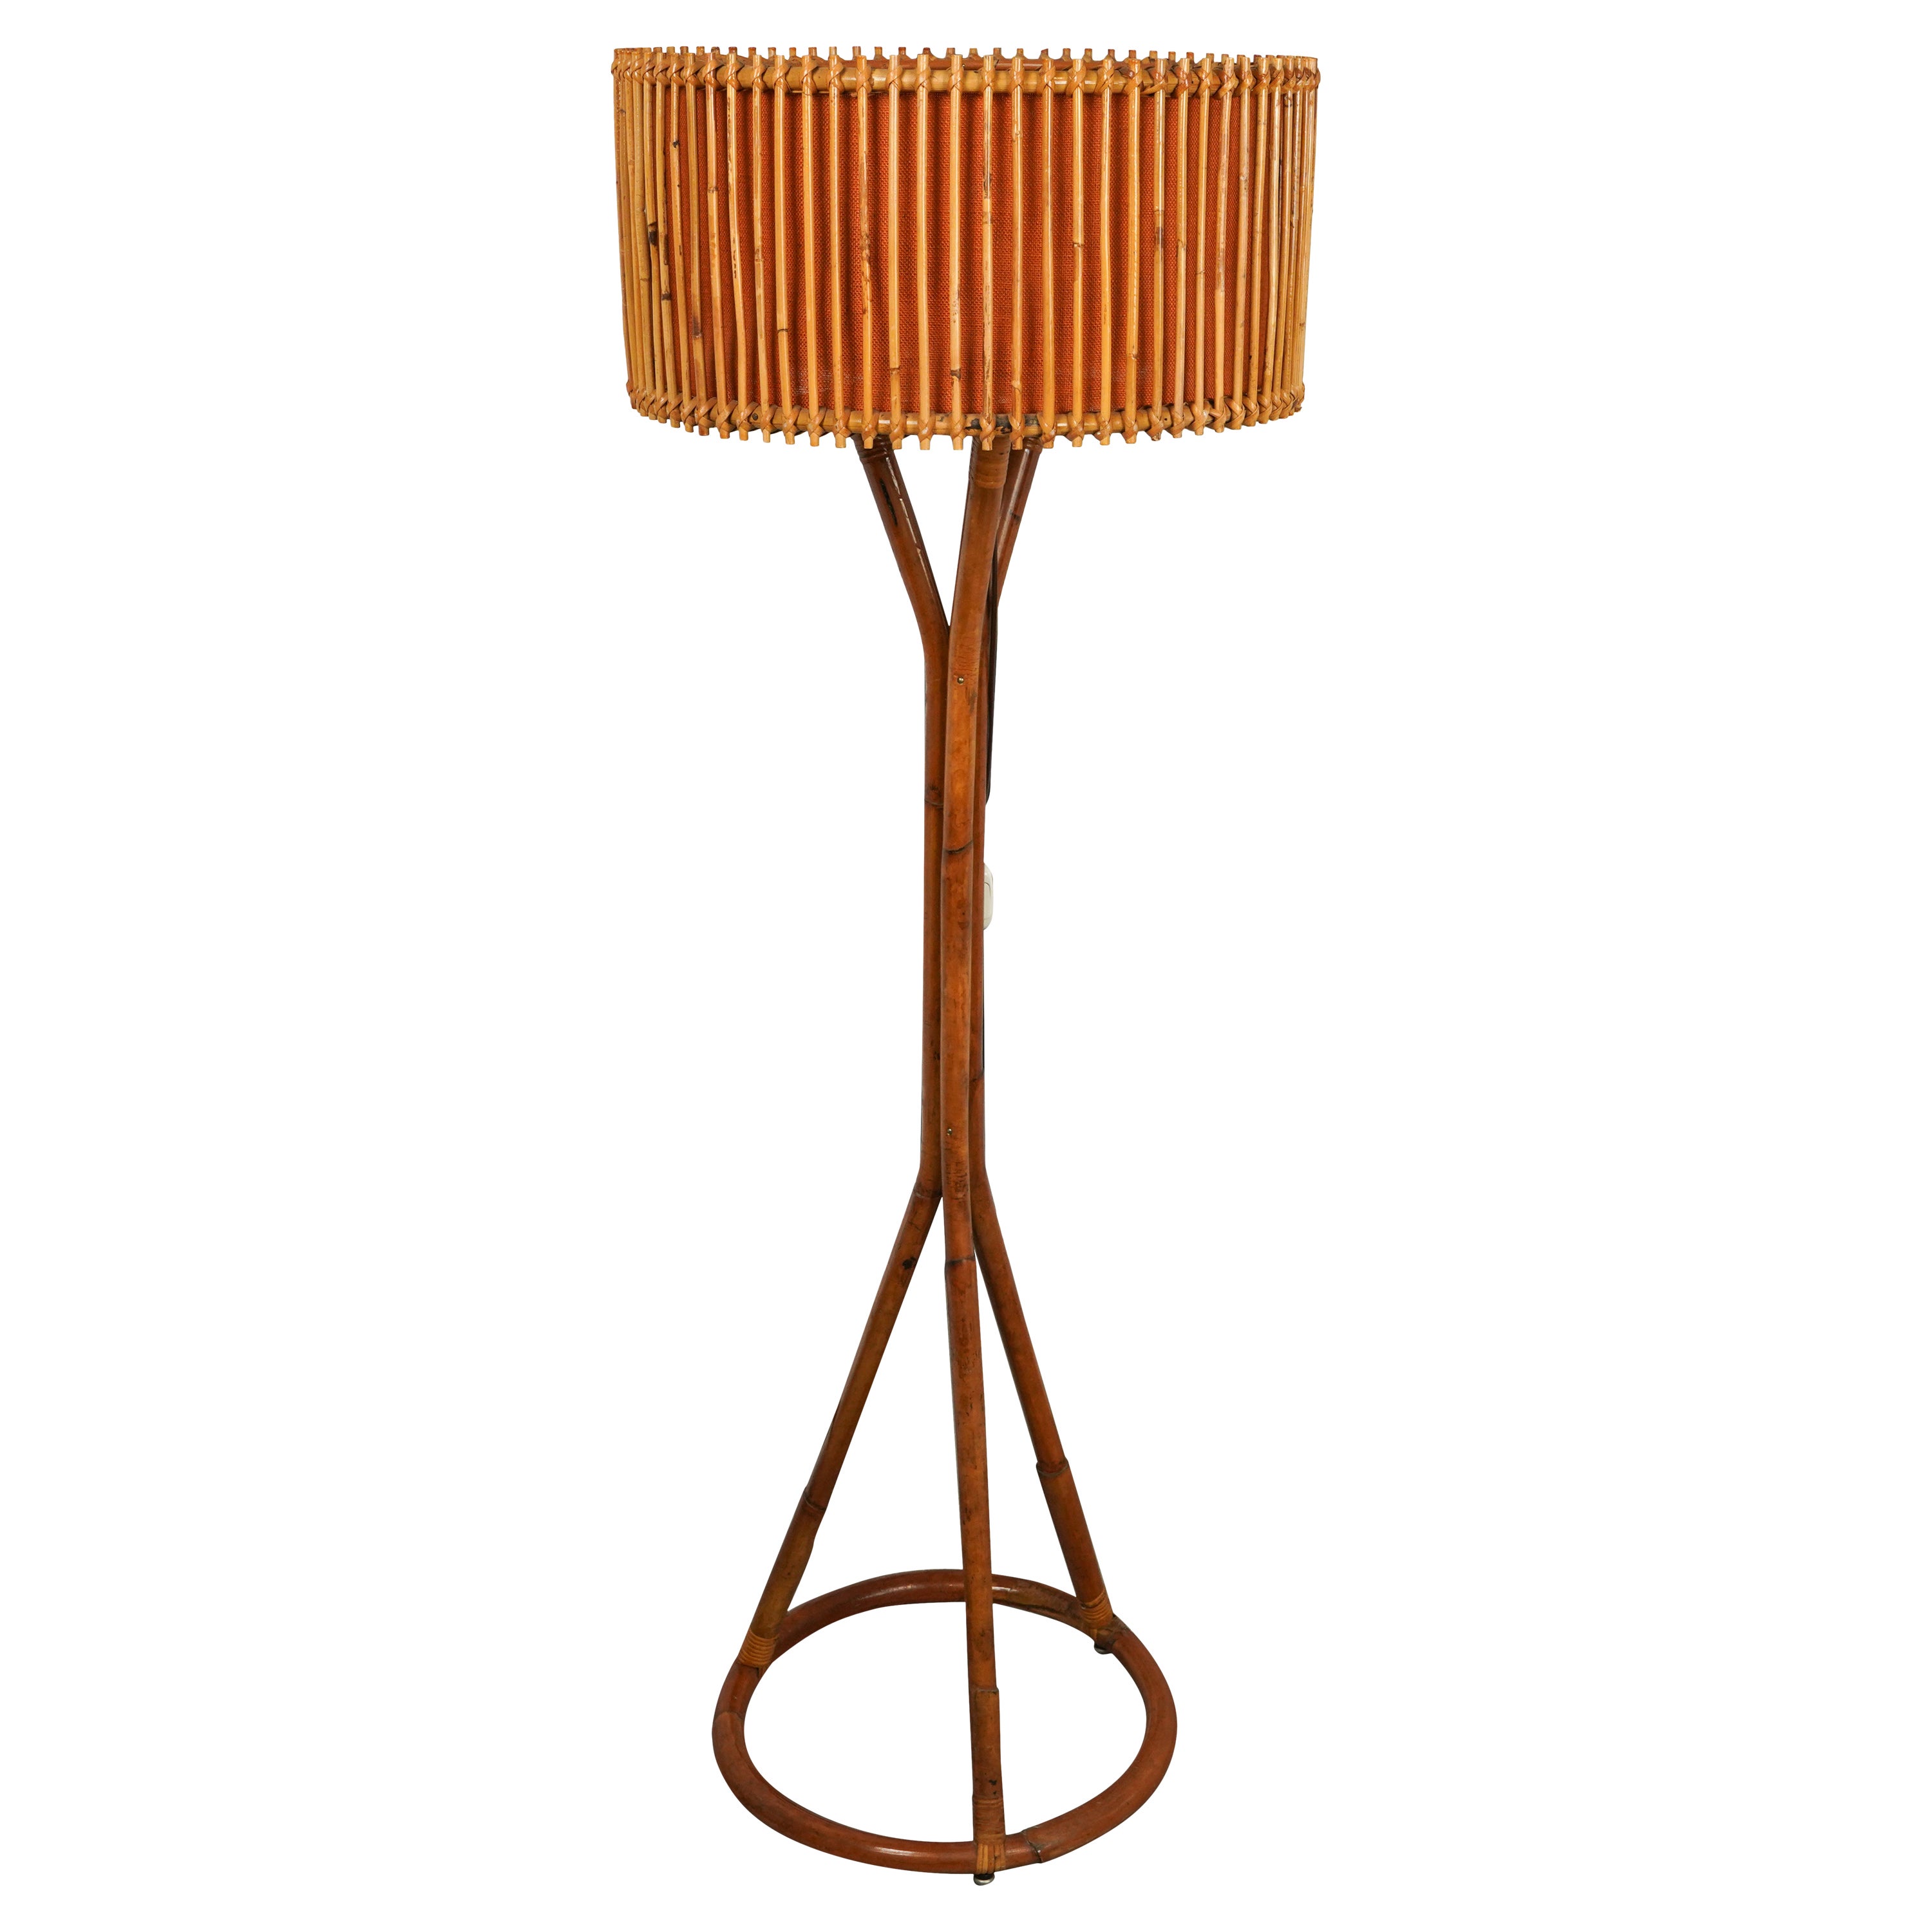 Midcentury Bamboo and Rattan Floor Lamp Franco Albini Style, Italy 1960s For Sale